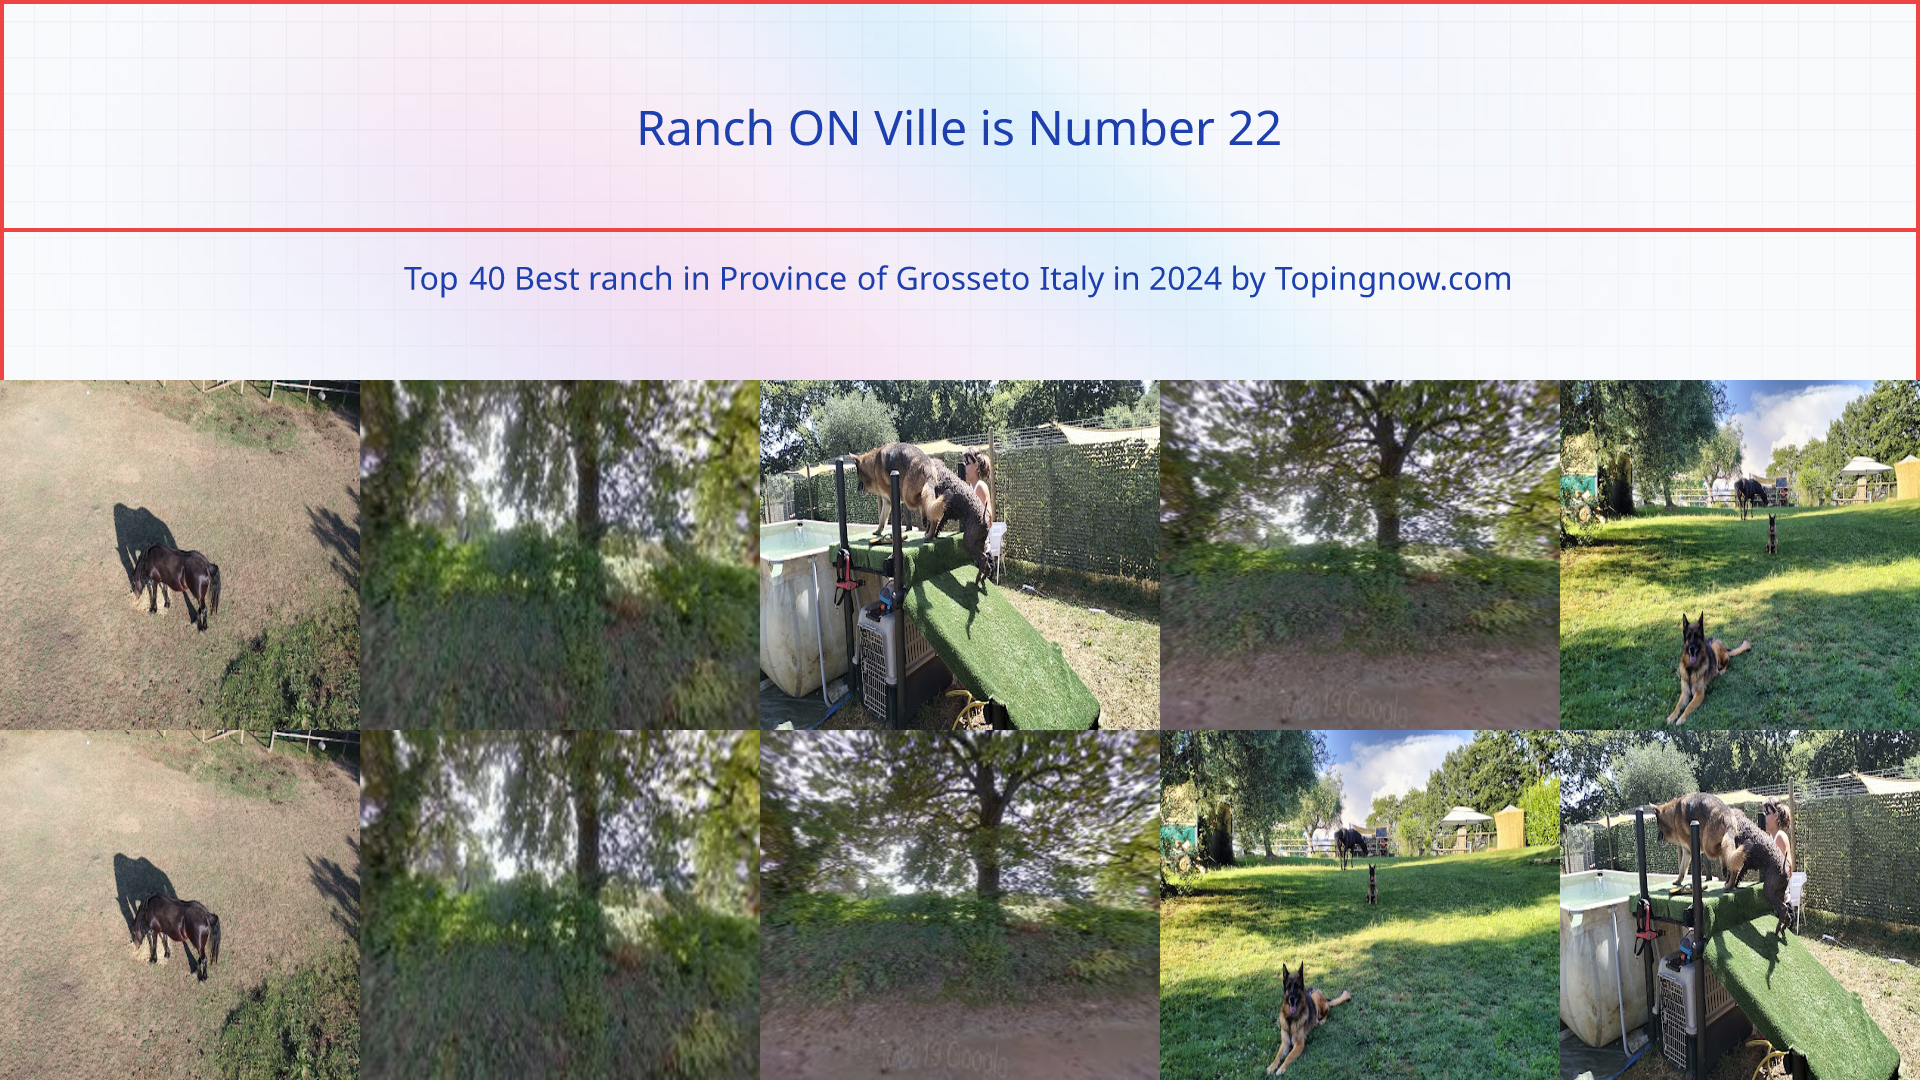 Ranch ON Ville: Top 40 Best ranch in Province of Grosseto Italy in 2024